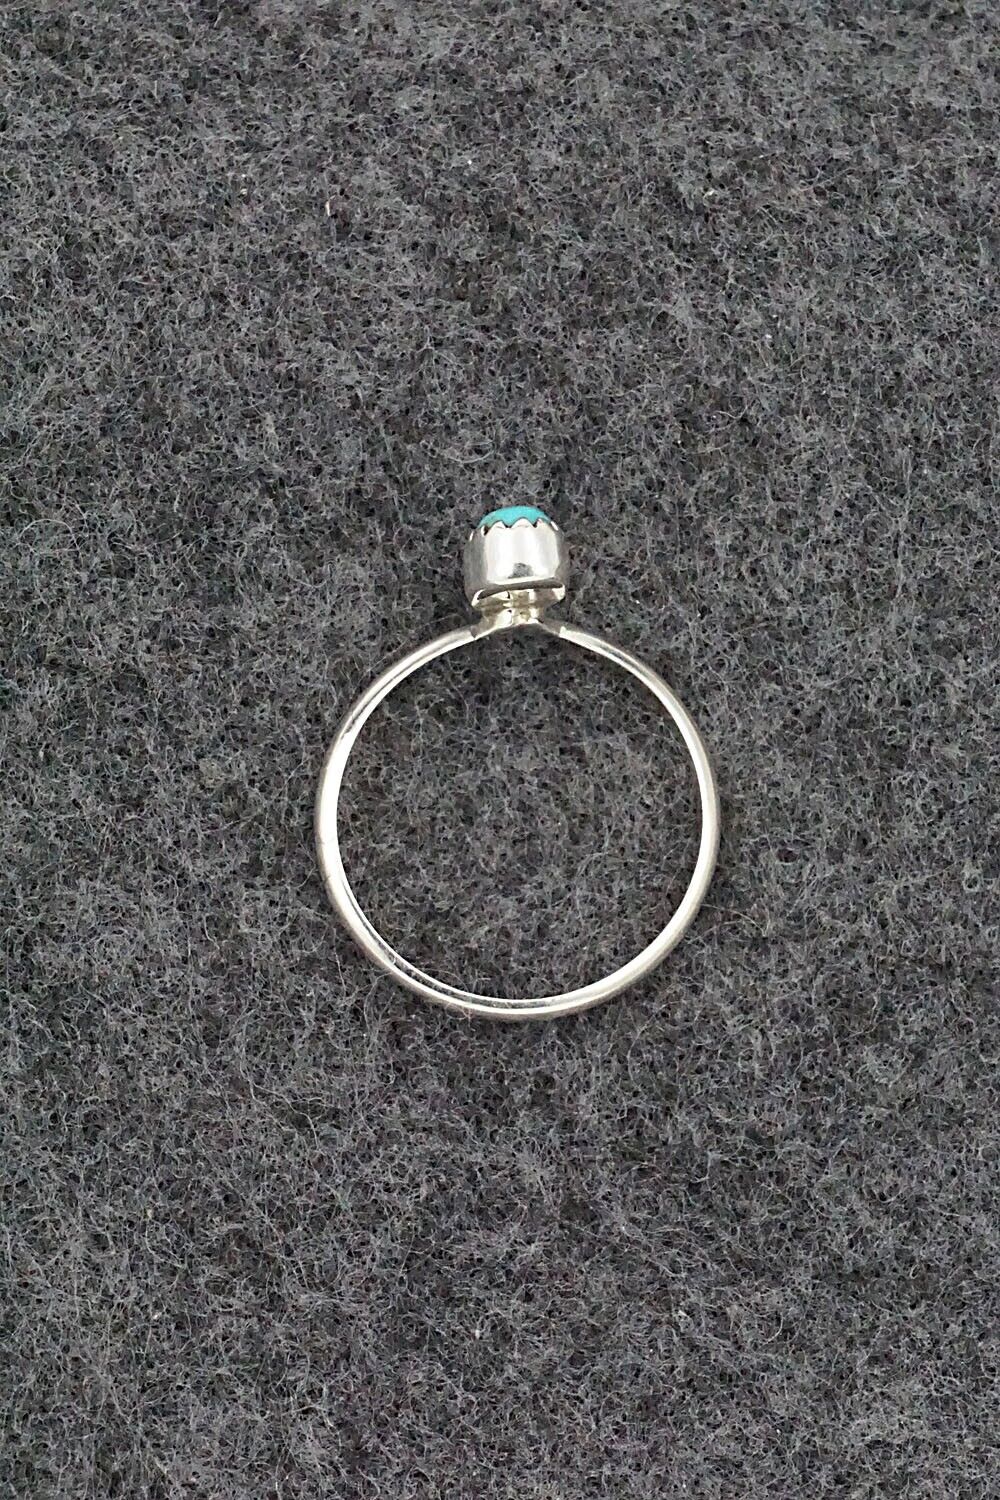 Turquoise & Sterling Silver Ring - Hiram Largo - Size 8.75